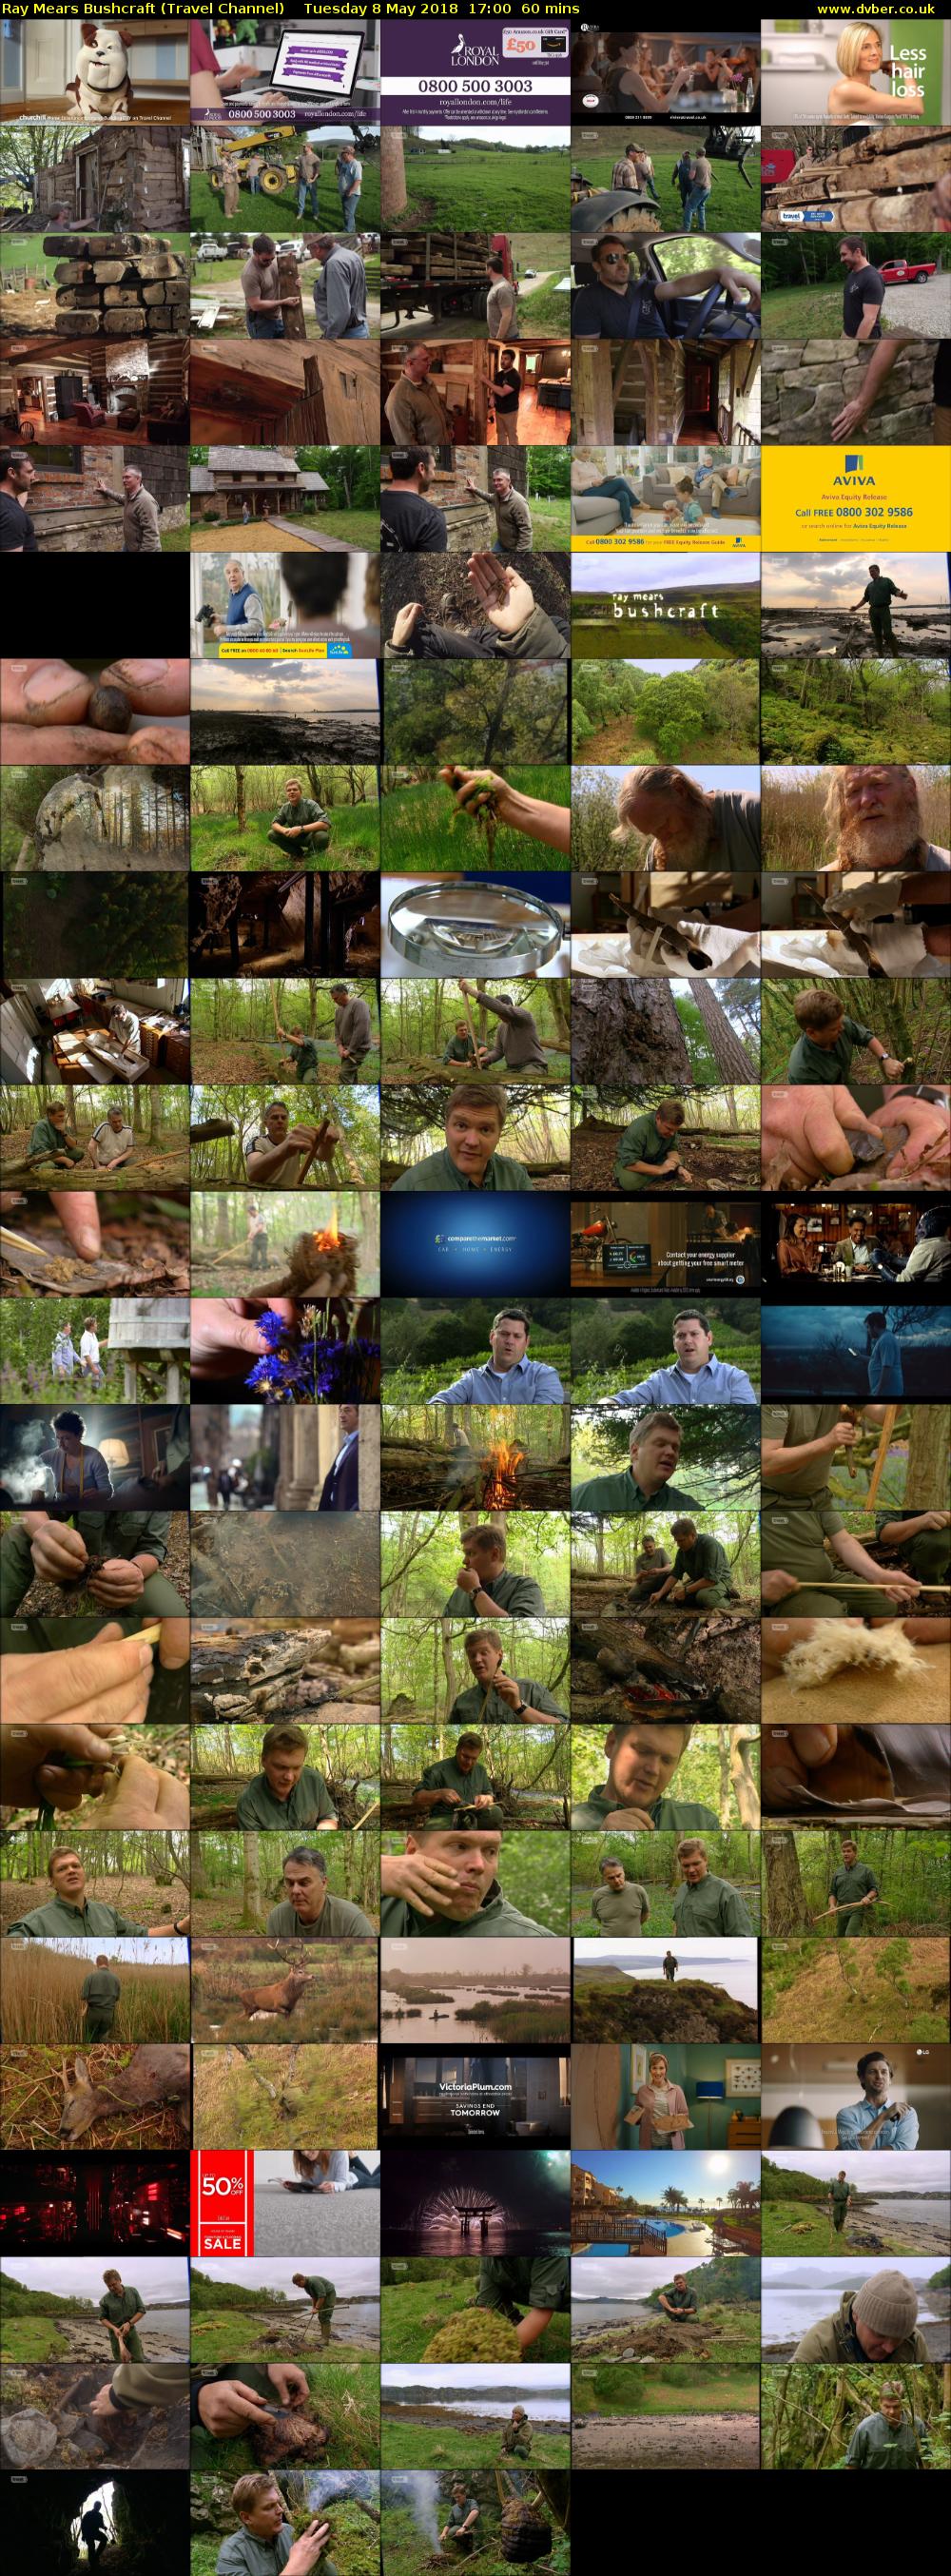 Ray Mears Bushcraft (Travel Channel) Tuesday 8 May 2018 17:00 - 18:00